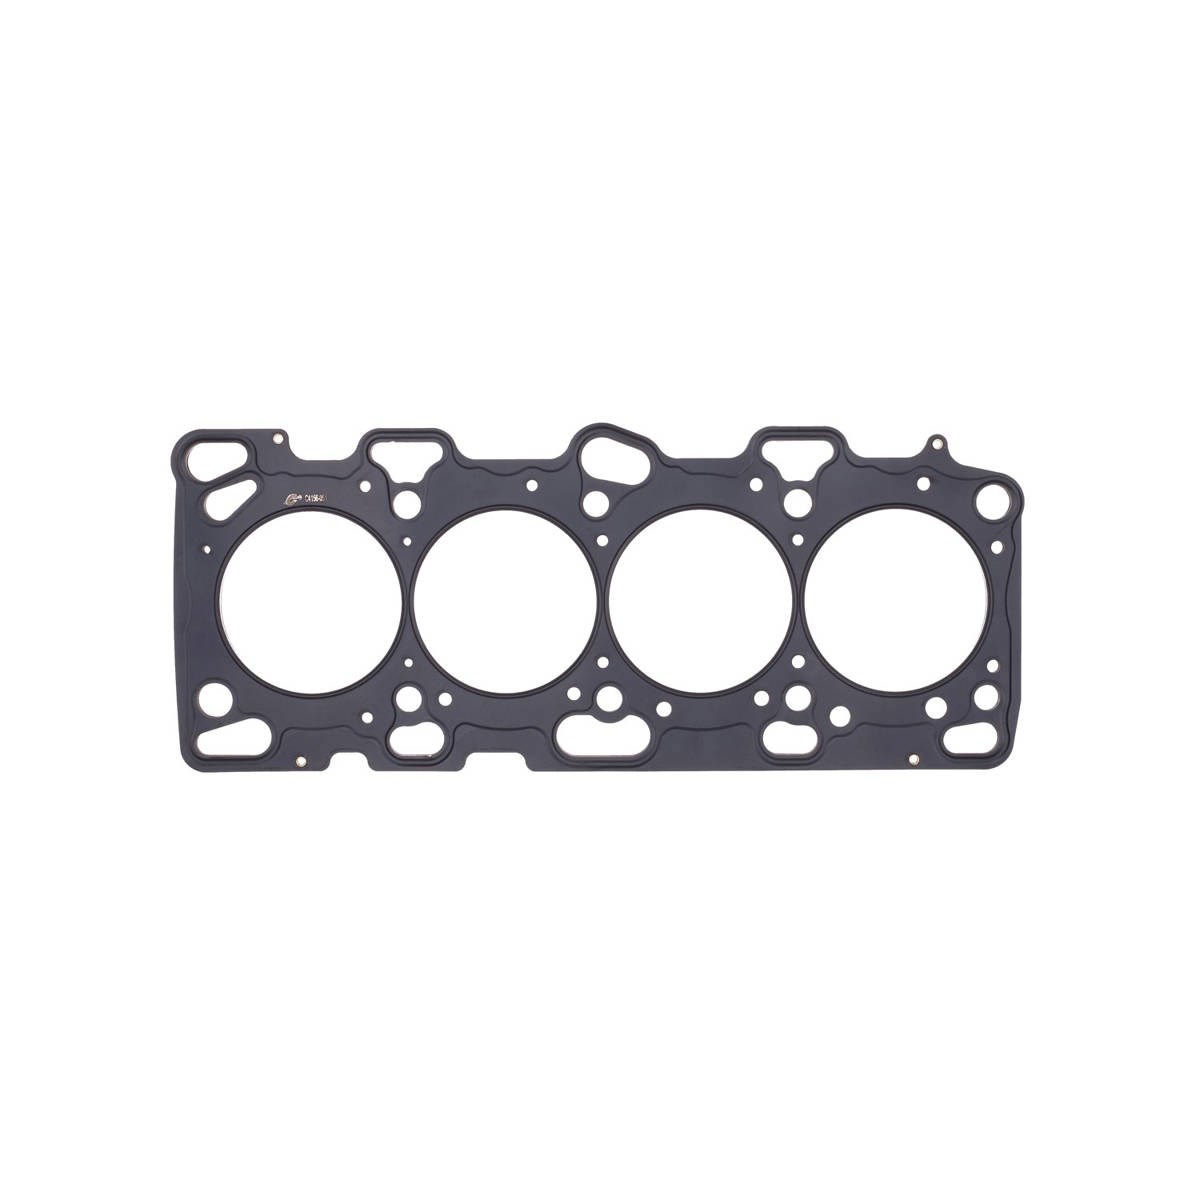 Cylinder Head Gasket Mitsubishi 4G63T .092" MLS , 86mm Bore, DOHC, Evo 4-8 ONLY Cometic C4156-092